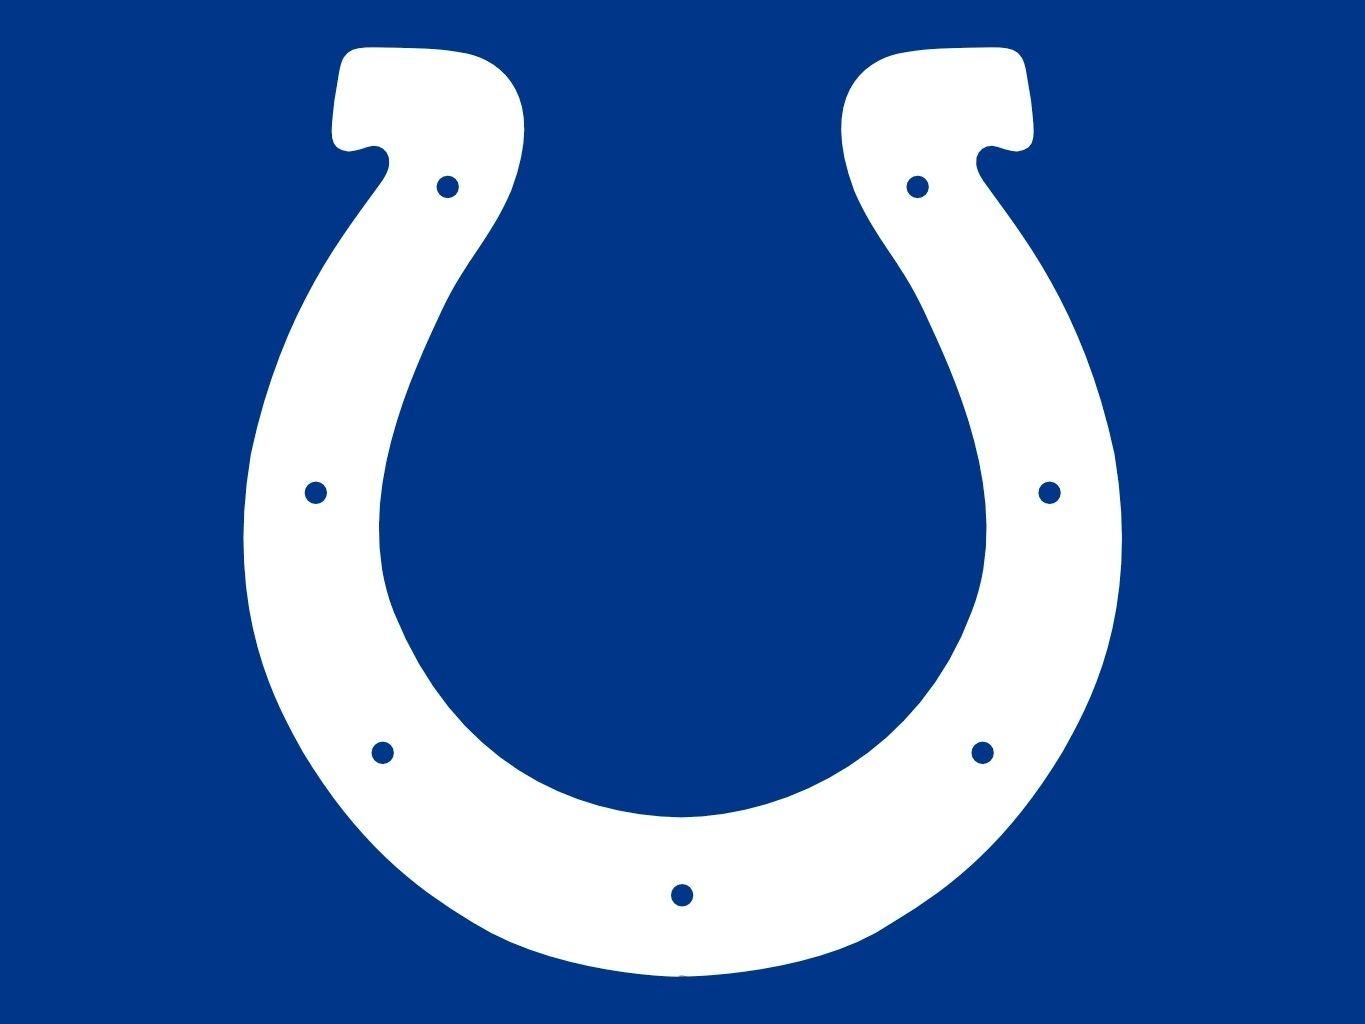 Colts Horseshoe Logo - Indianapolis Colts Logo, Colts Symbol Meaning, History and Evolution